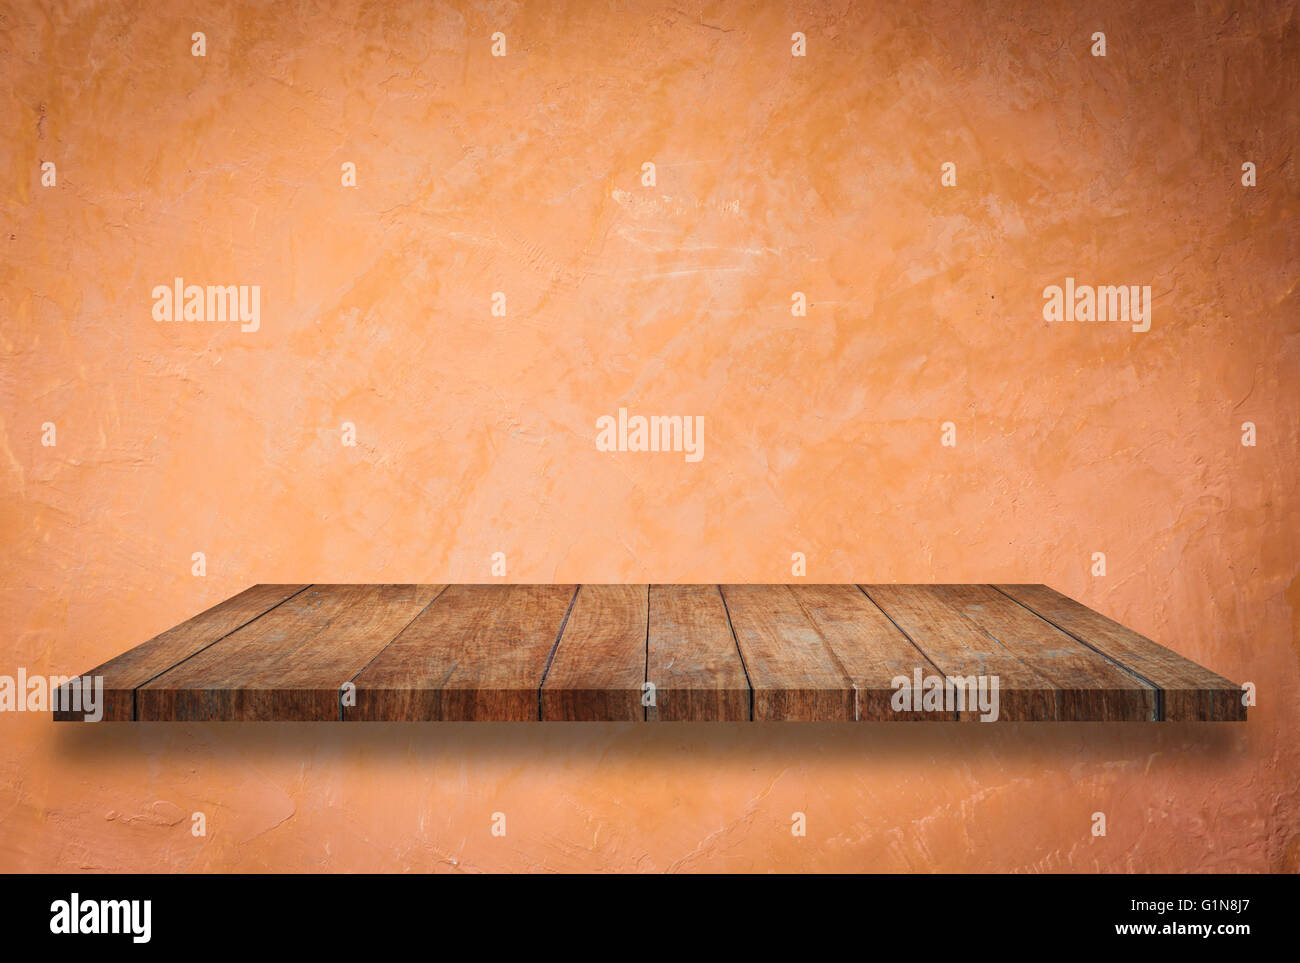 Empty perspective top wooden shelf on orange wall background Stock Photo